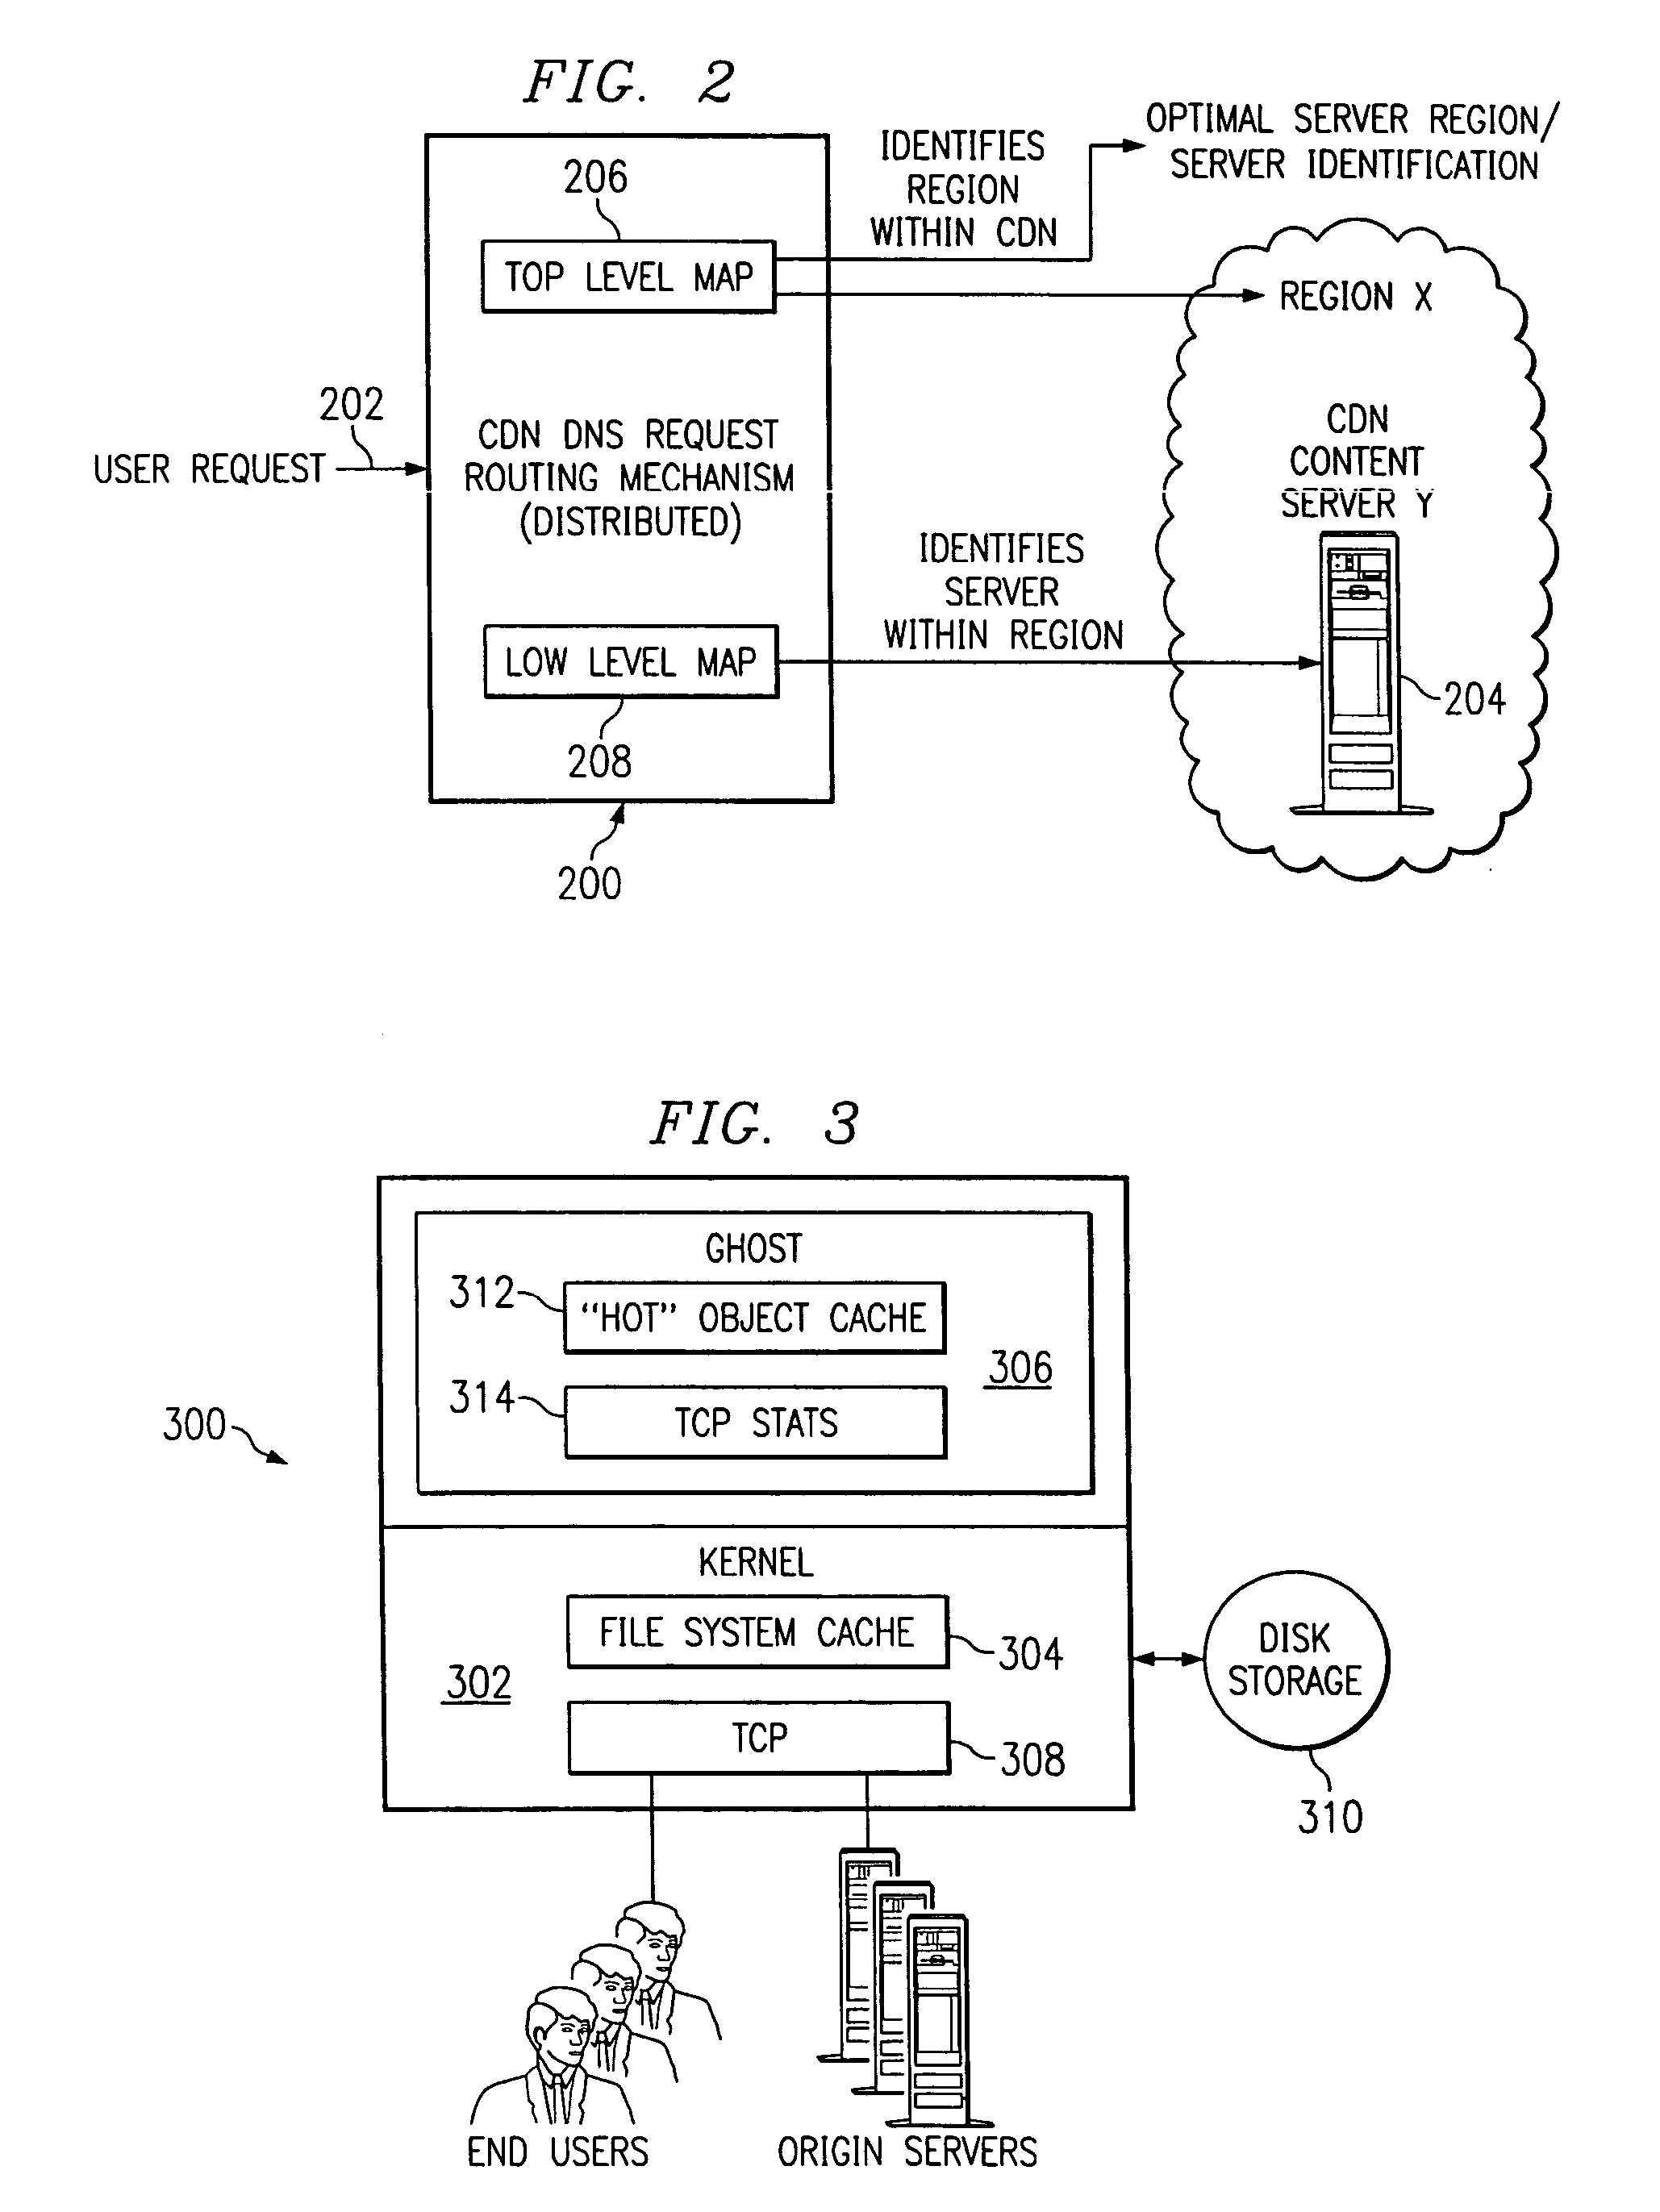 Content delivery network map generation using passive measurement data